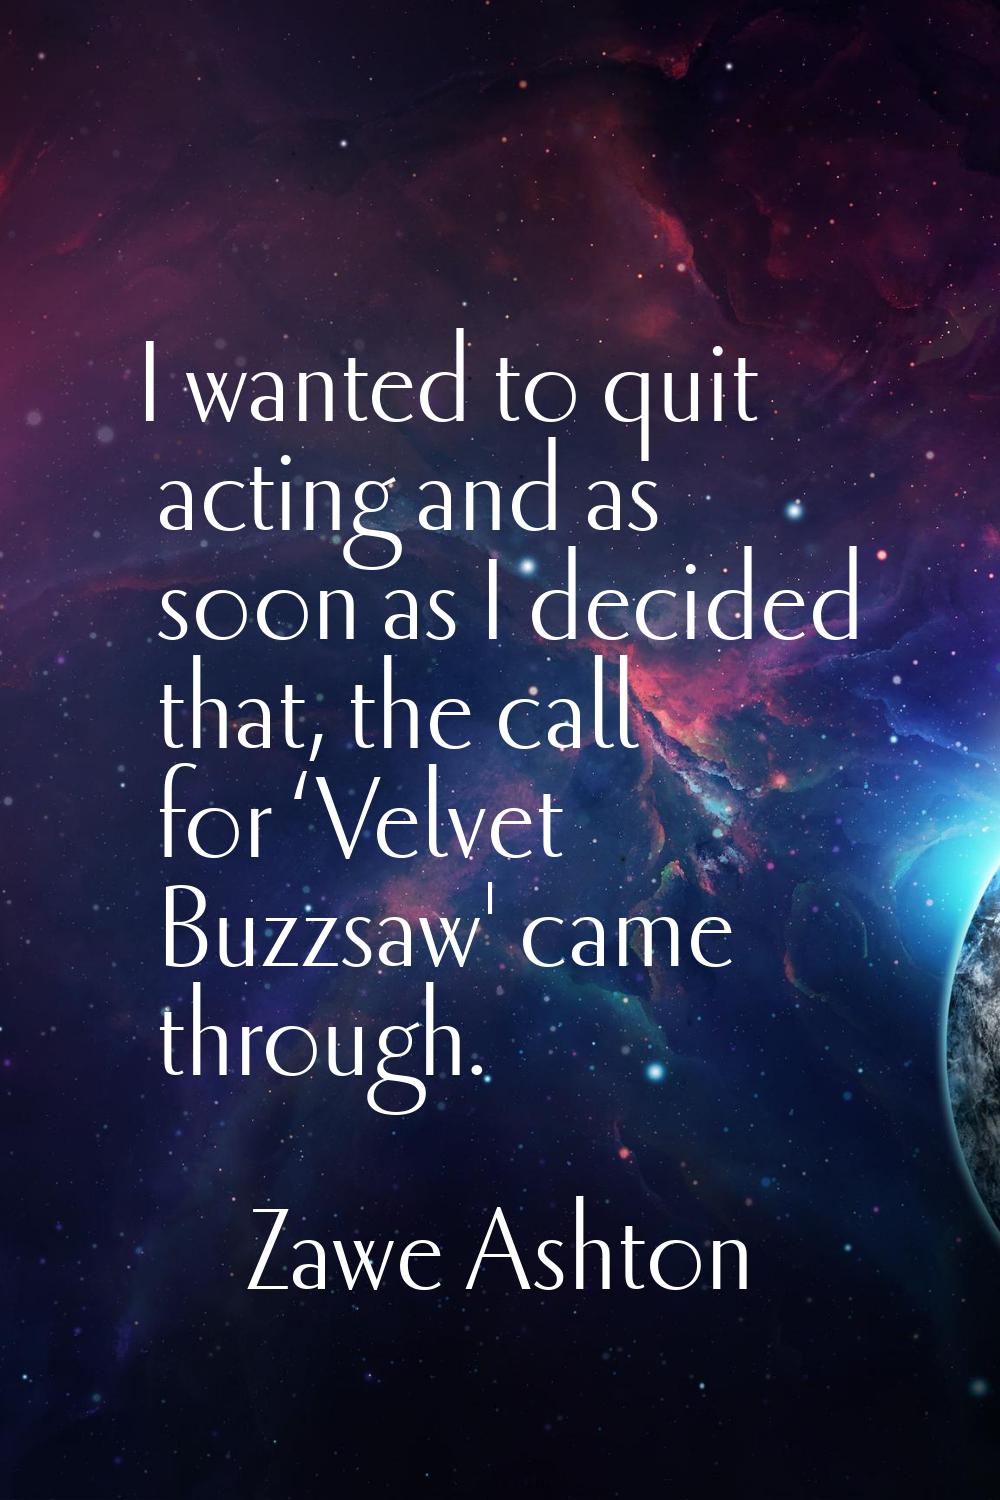 I wanted to quit acting and as soon as I decided that, the call for ‘Velvet Buzzsaw' came through.